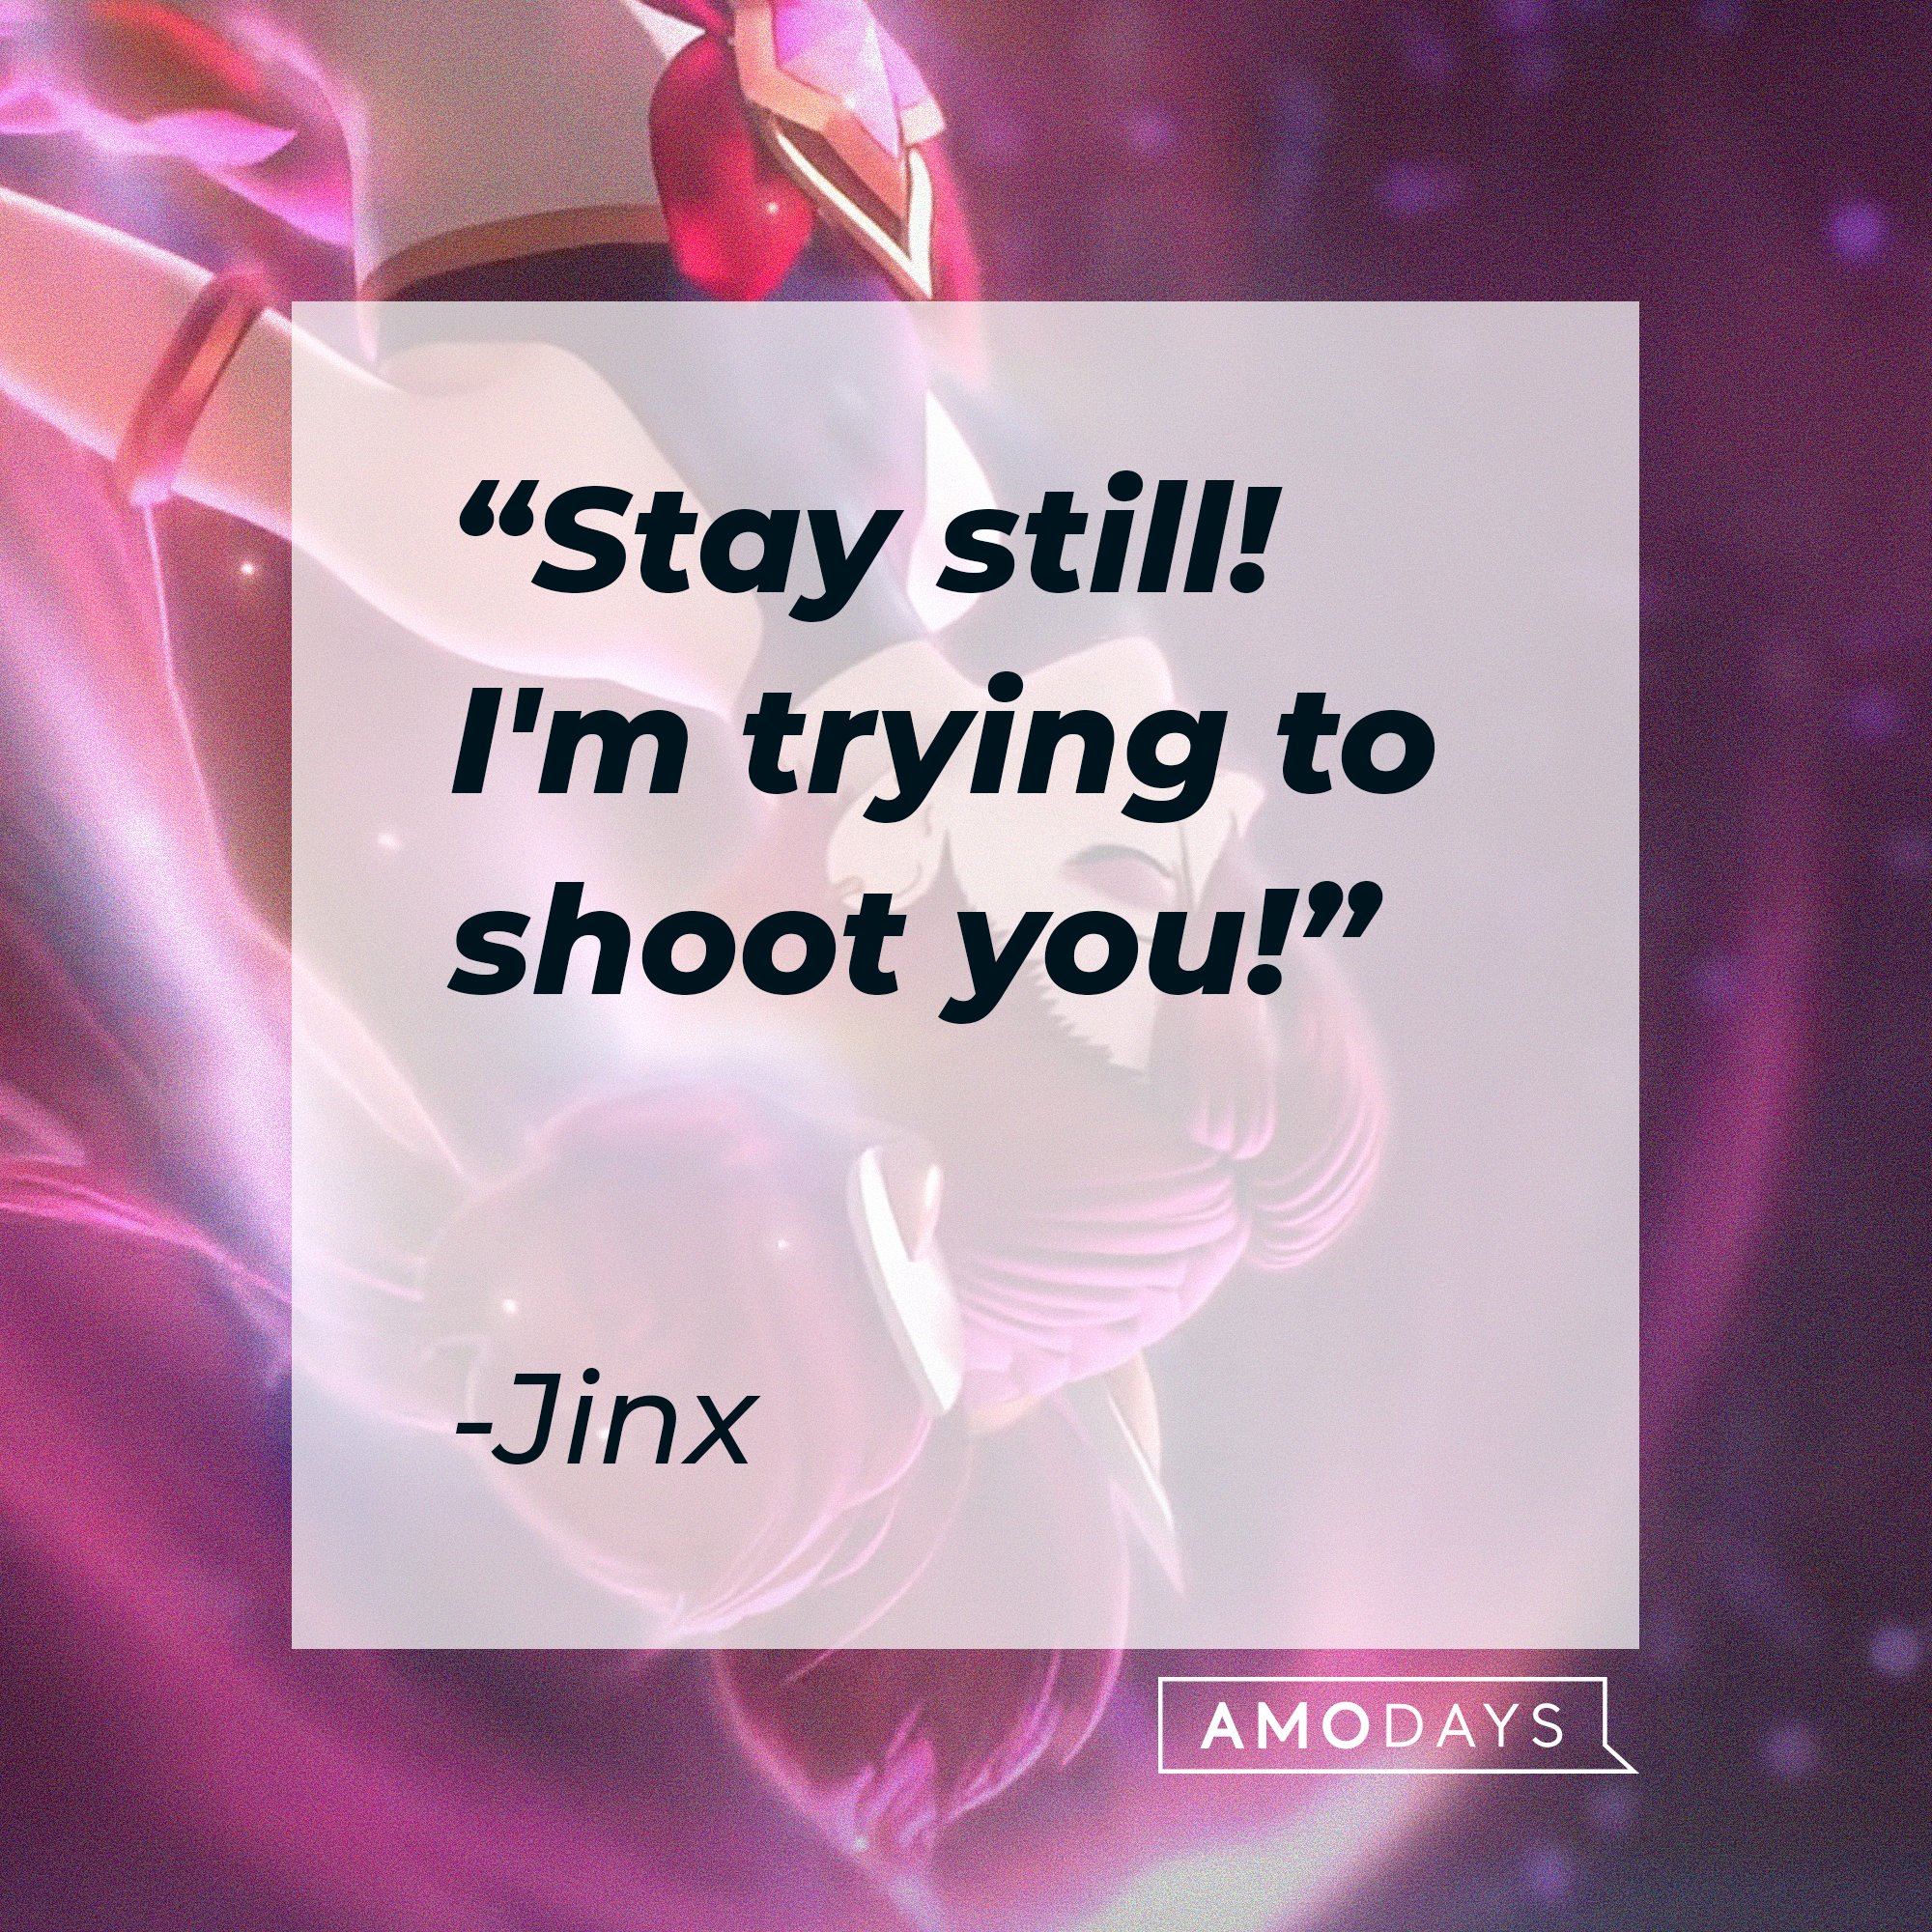 Jinx's quote: "Stay still! I'm trying to shoot you!" | Image: AmoDays